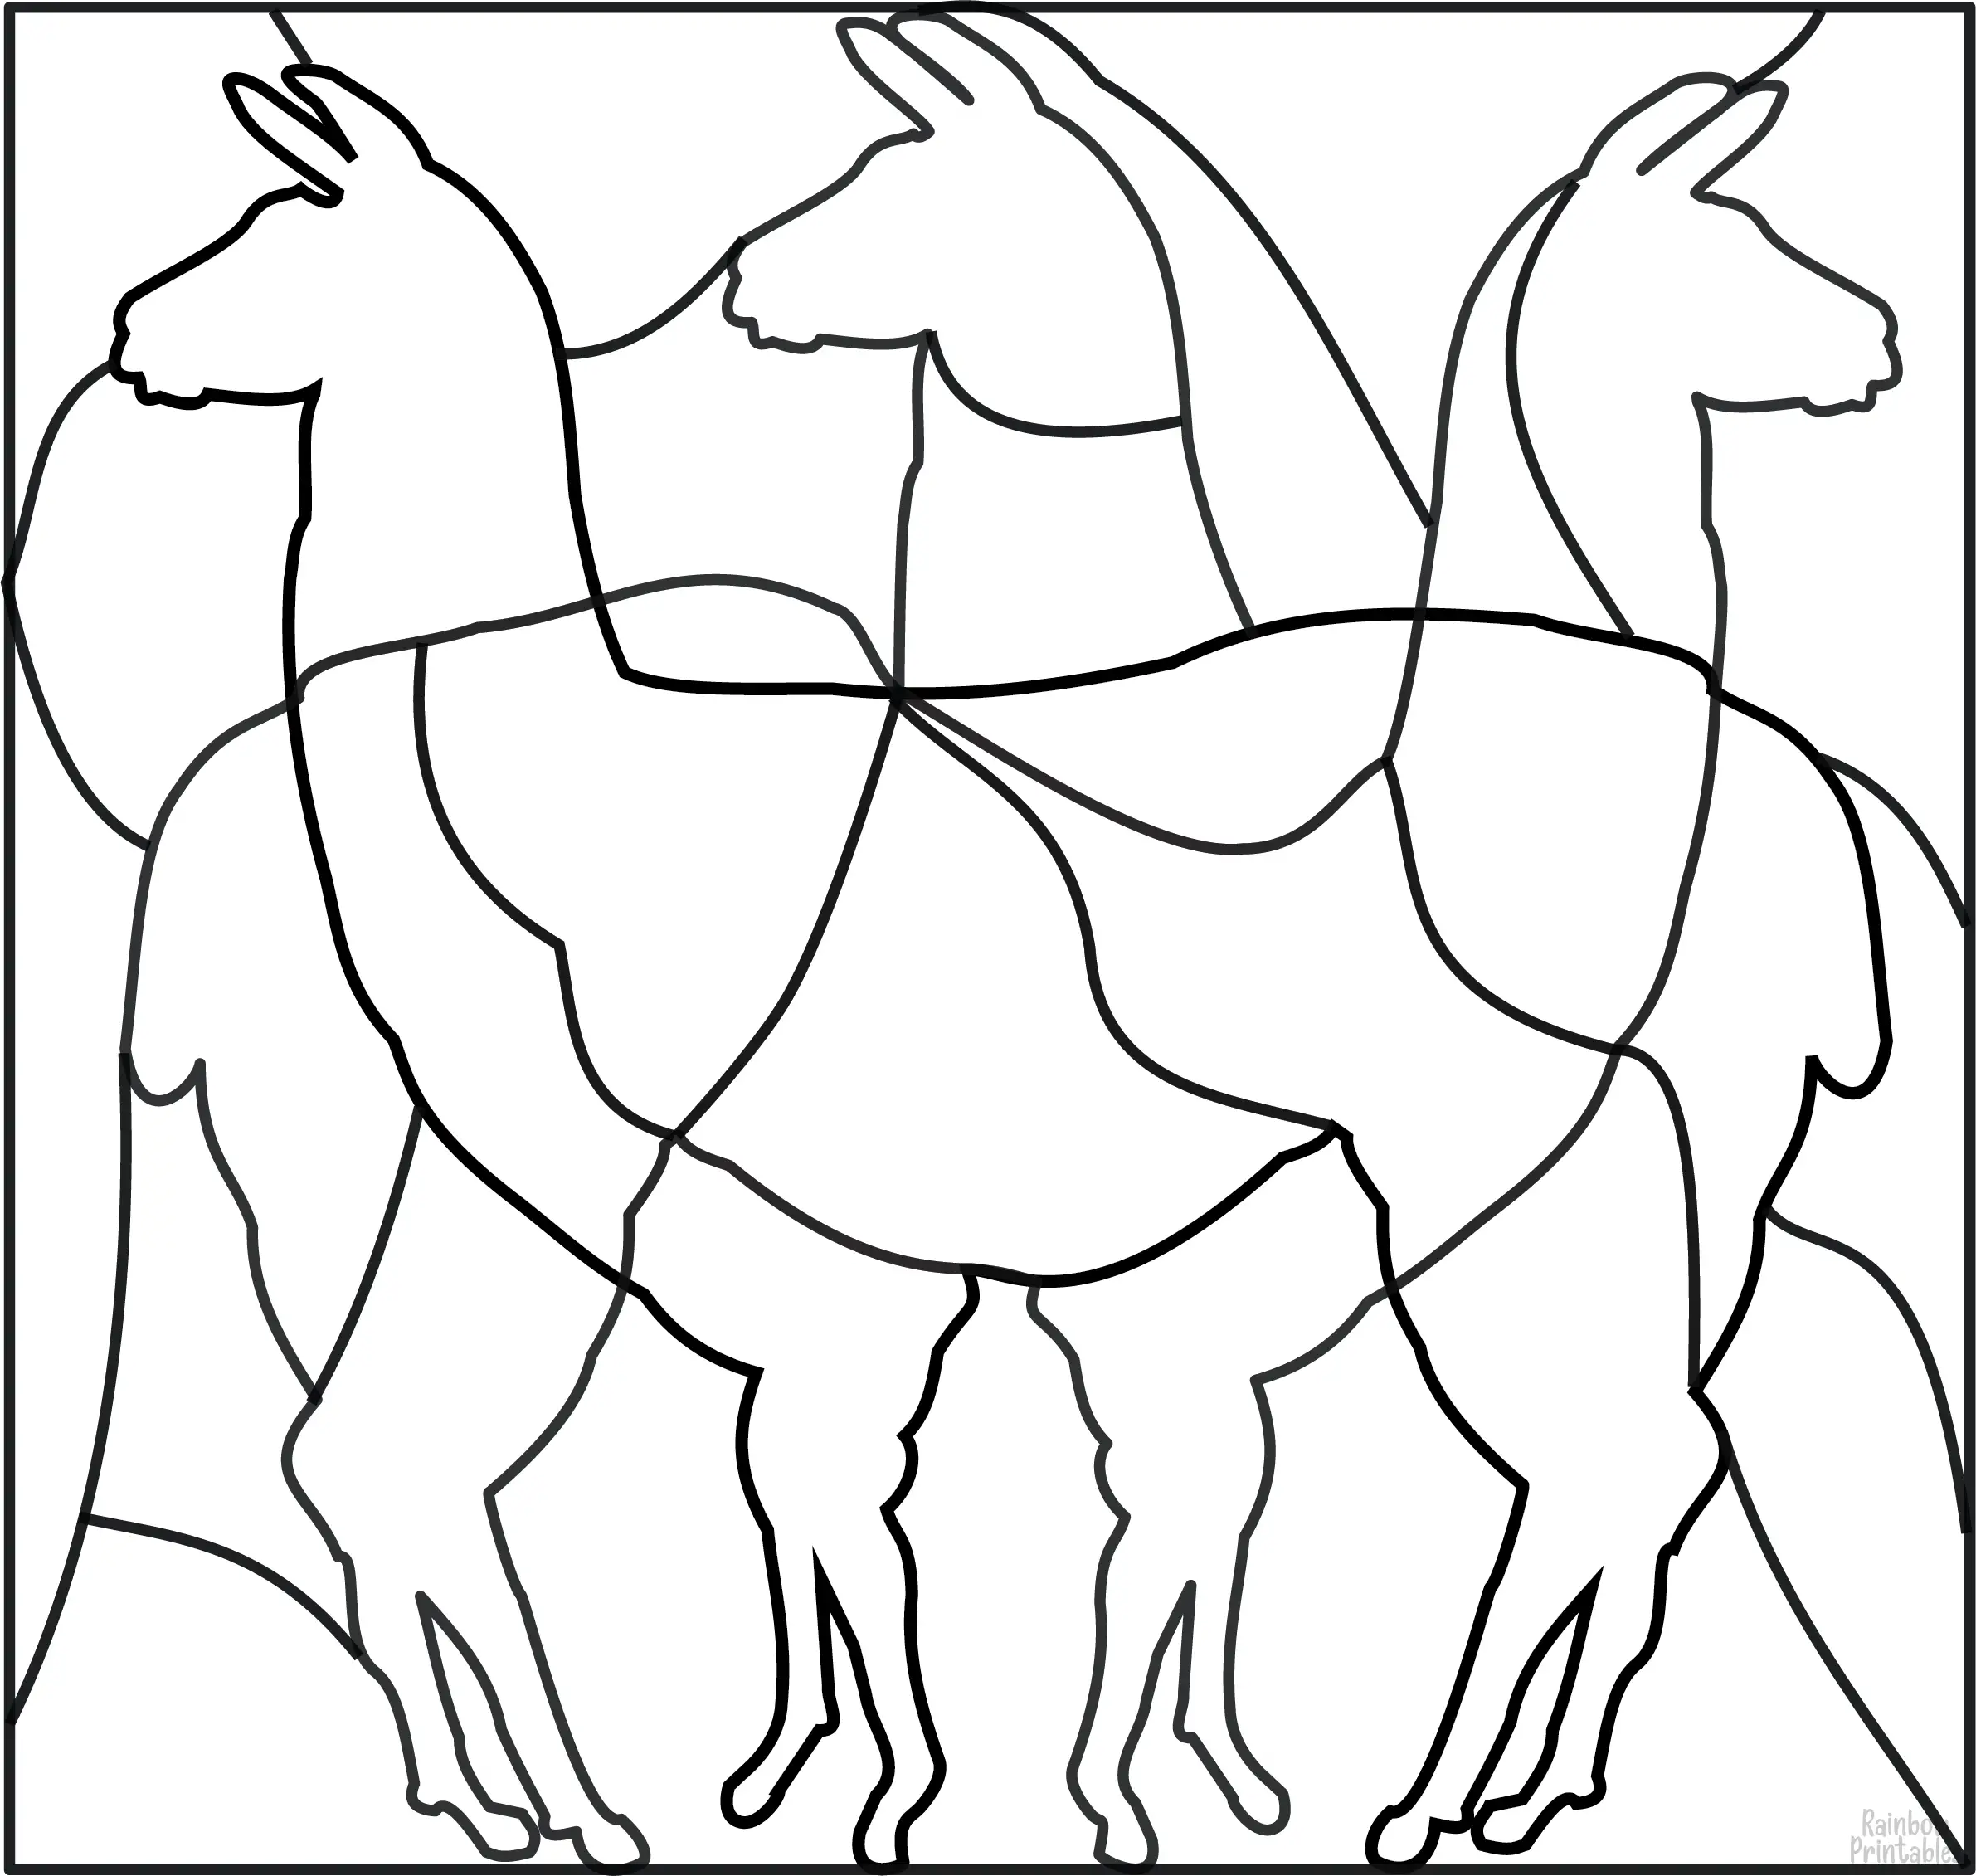 FREE LLAMA PUZZLE DIY GAME Free Clipart Coloring Pages for Kids Adults Art Activities Line Art